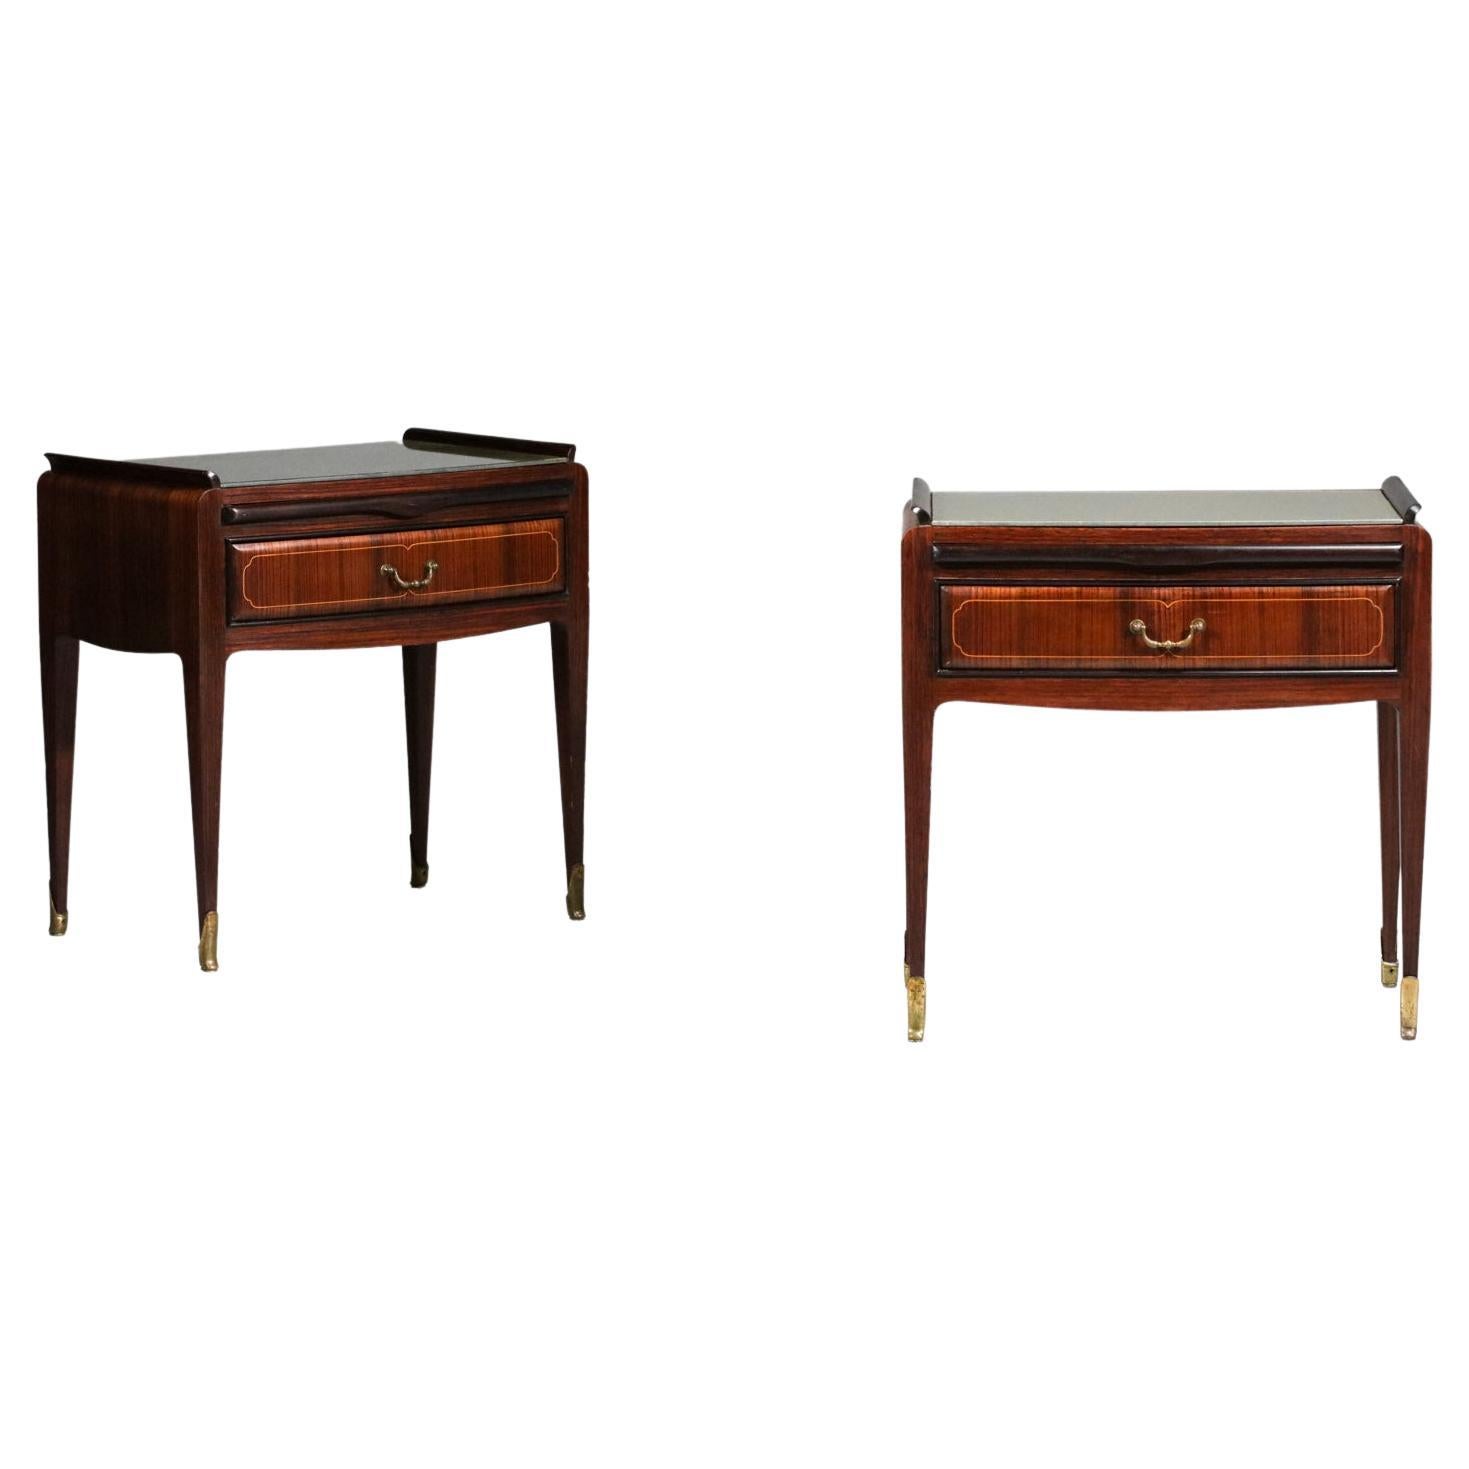 Pair of 60's bedside or night tables by Vittorio Dassi. Structure in rio rosewood, feet and handles in solid brass. These bedside tables have a drawer, a retractable shelf and a glass top. Note the nice brass inlay detail on the drawers which